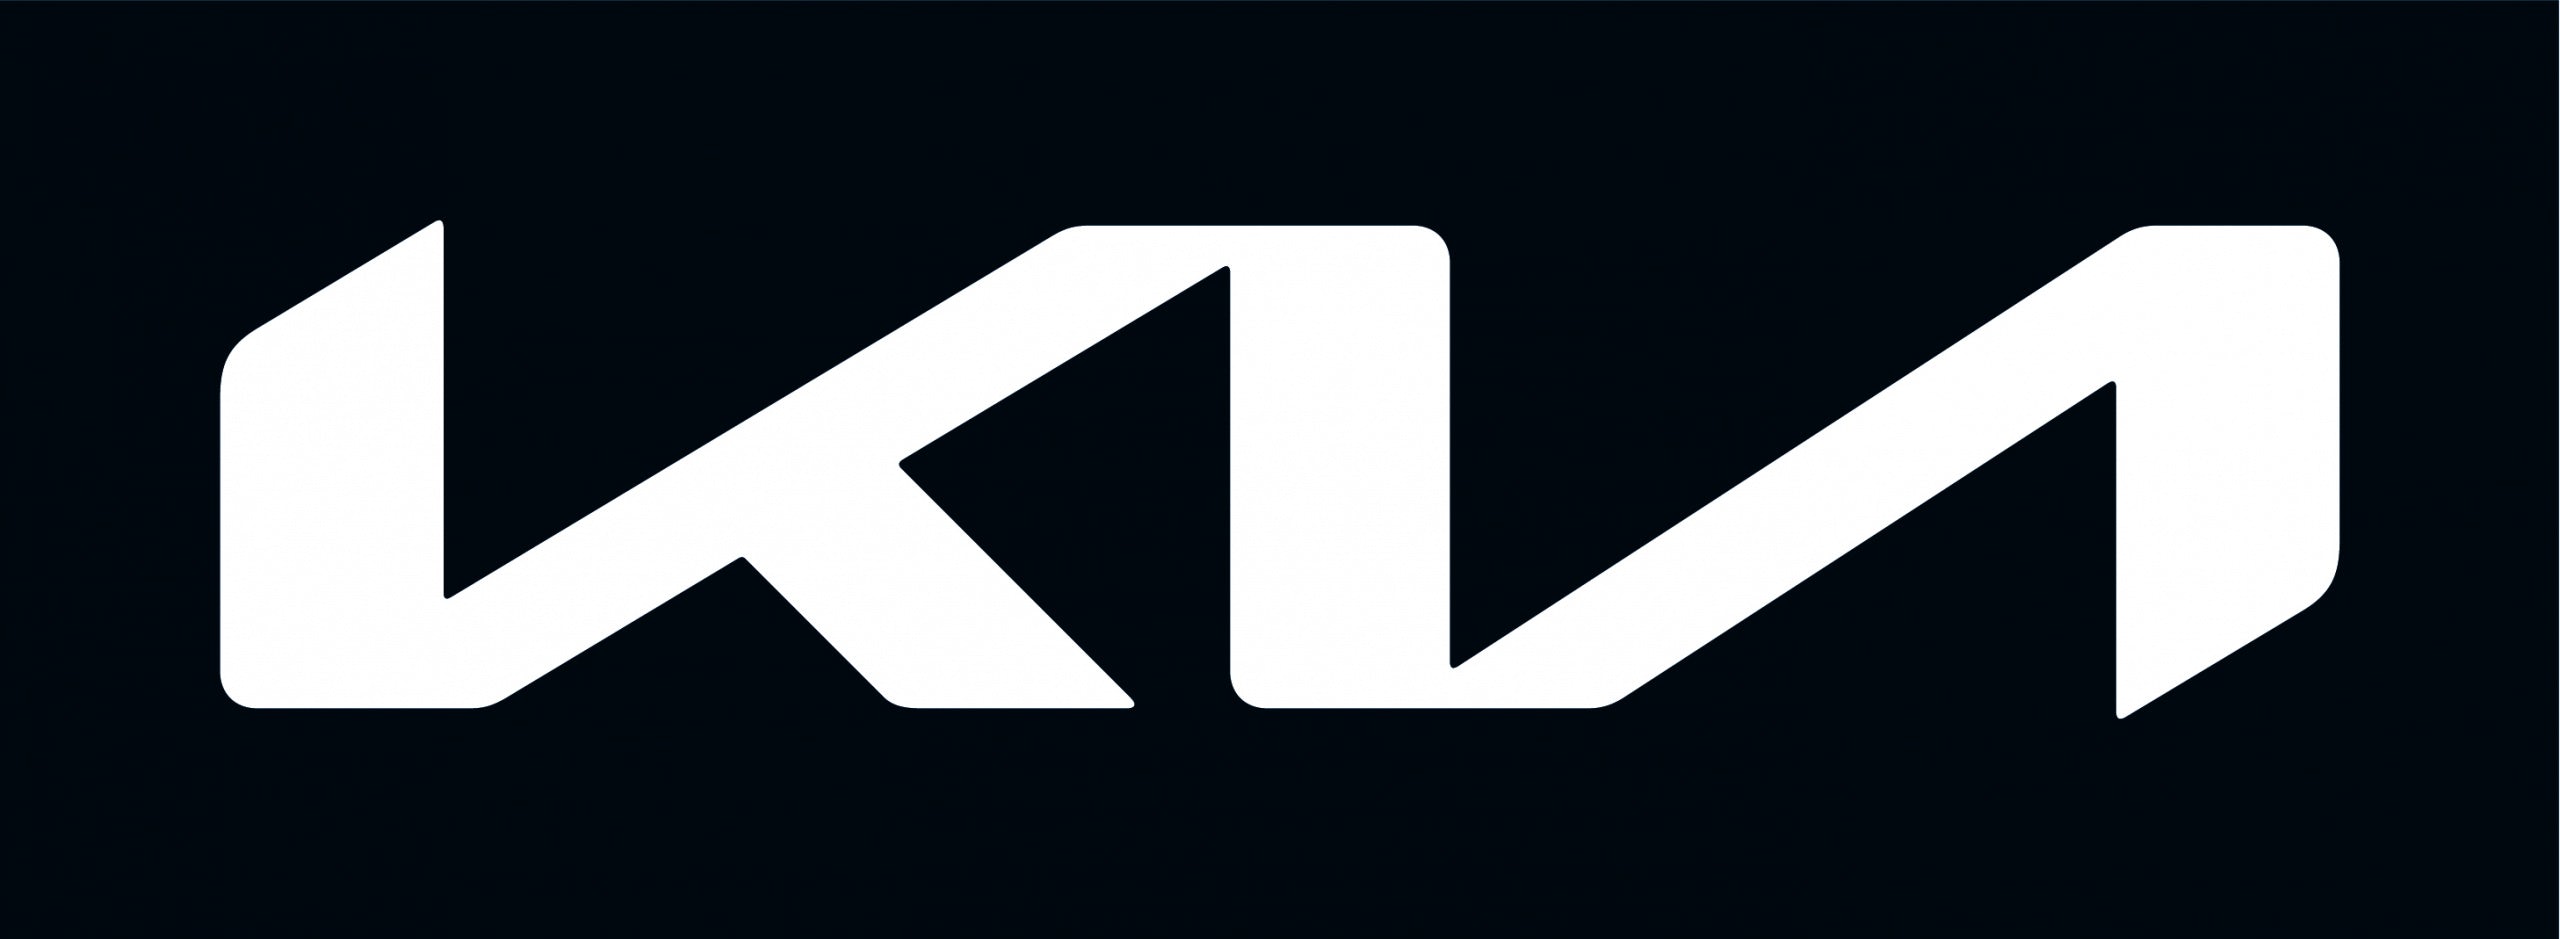 Discover the new design of new kia logos and be amazed